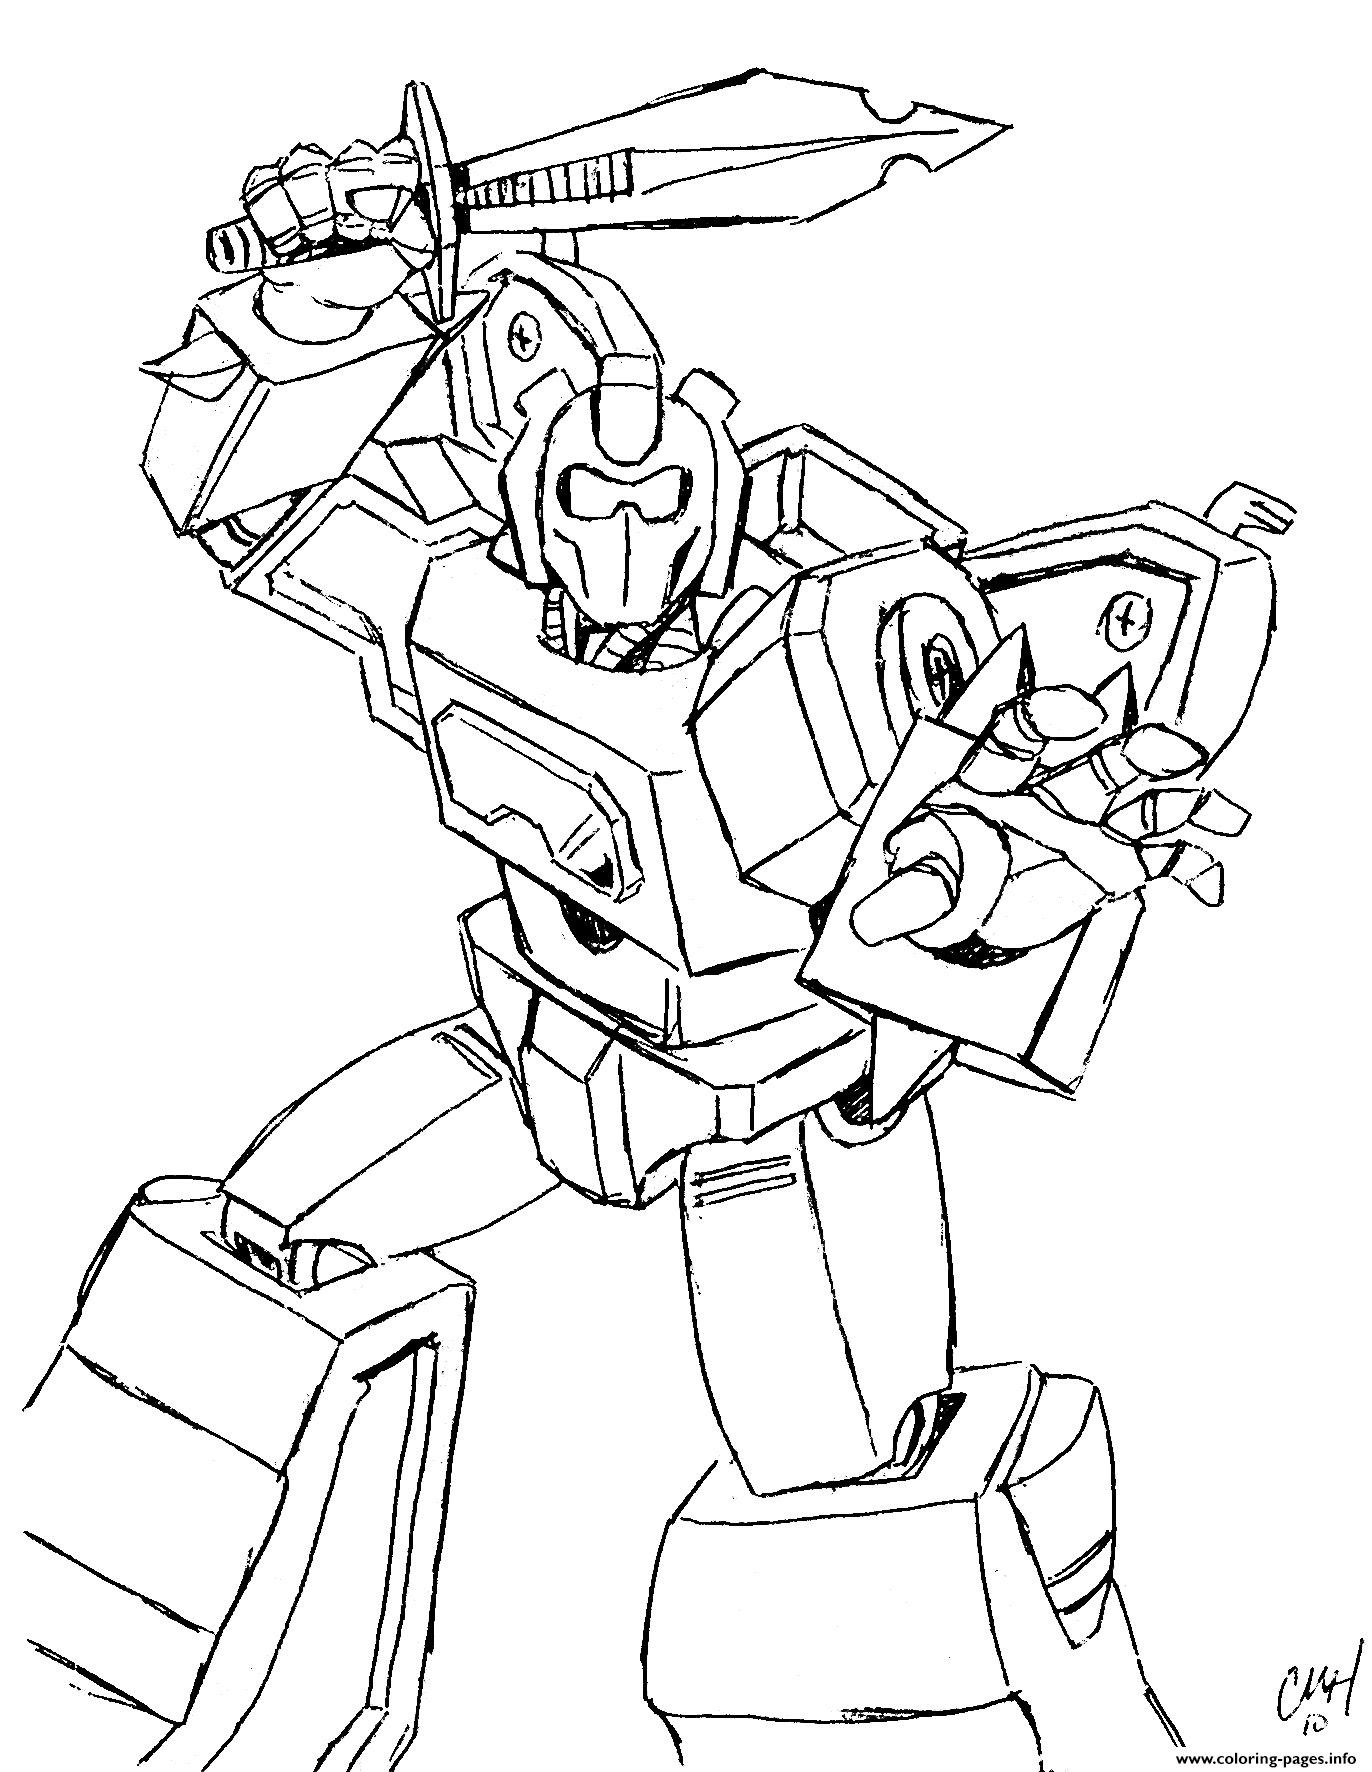 Transformers 3 Coloring Pages Printable